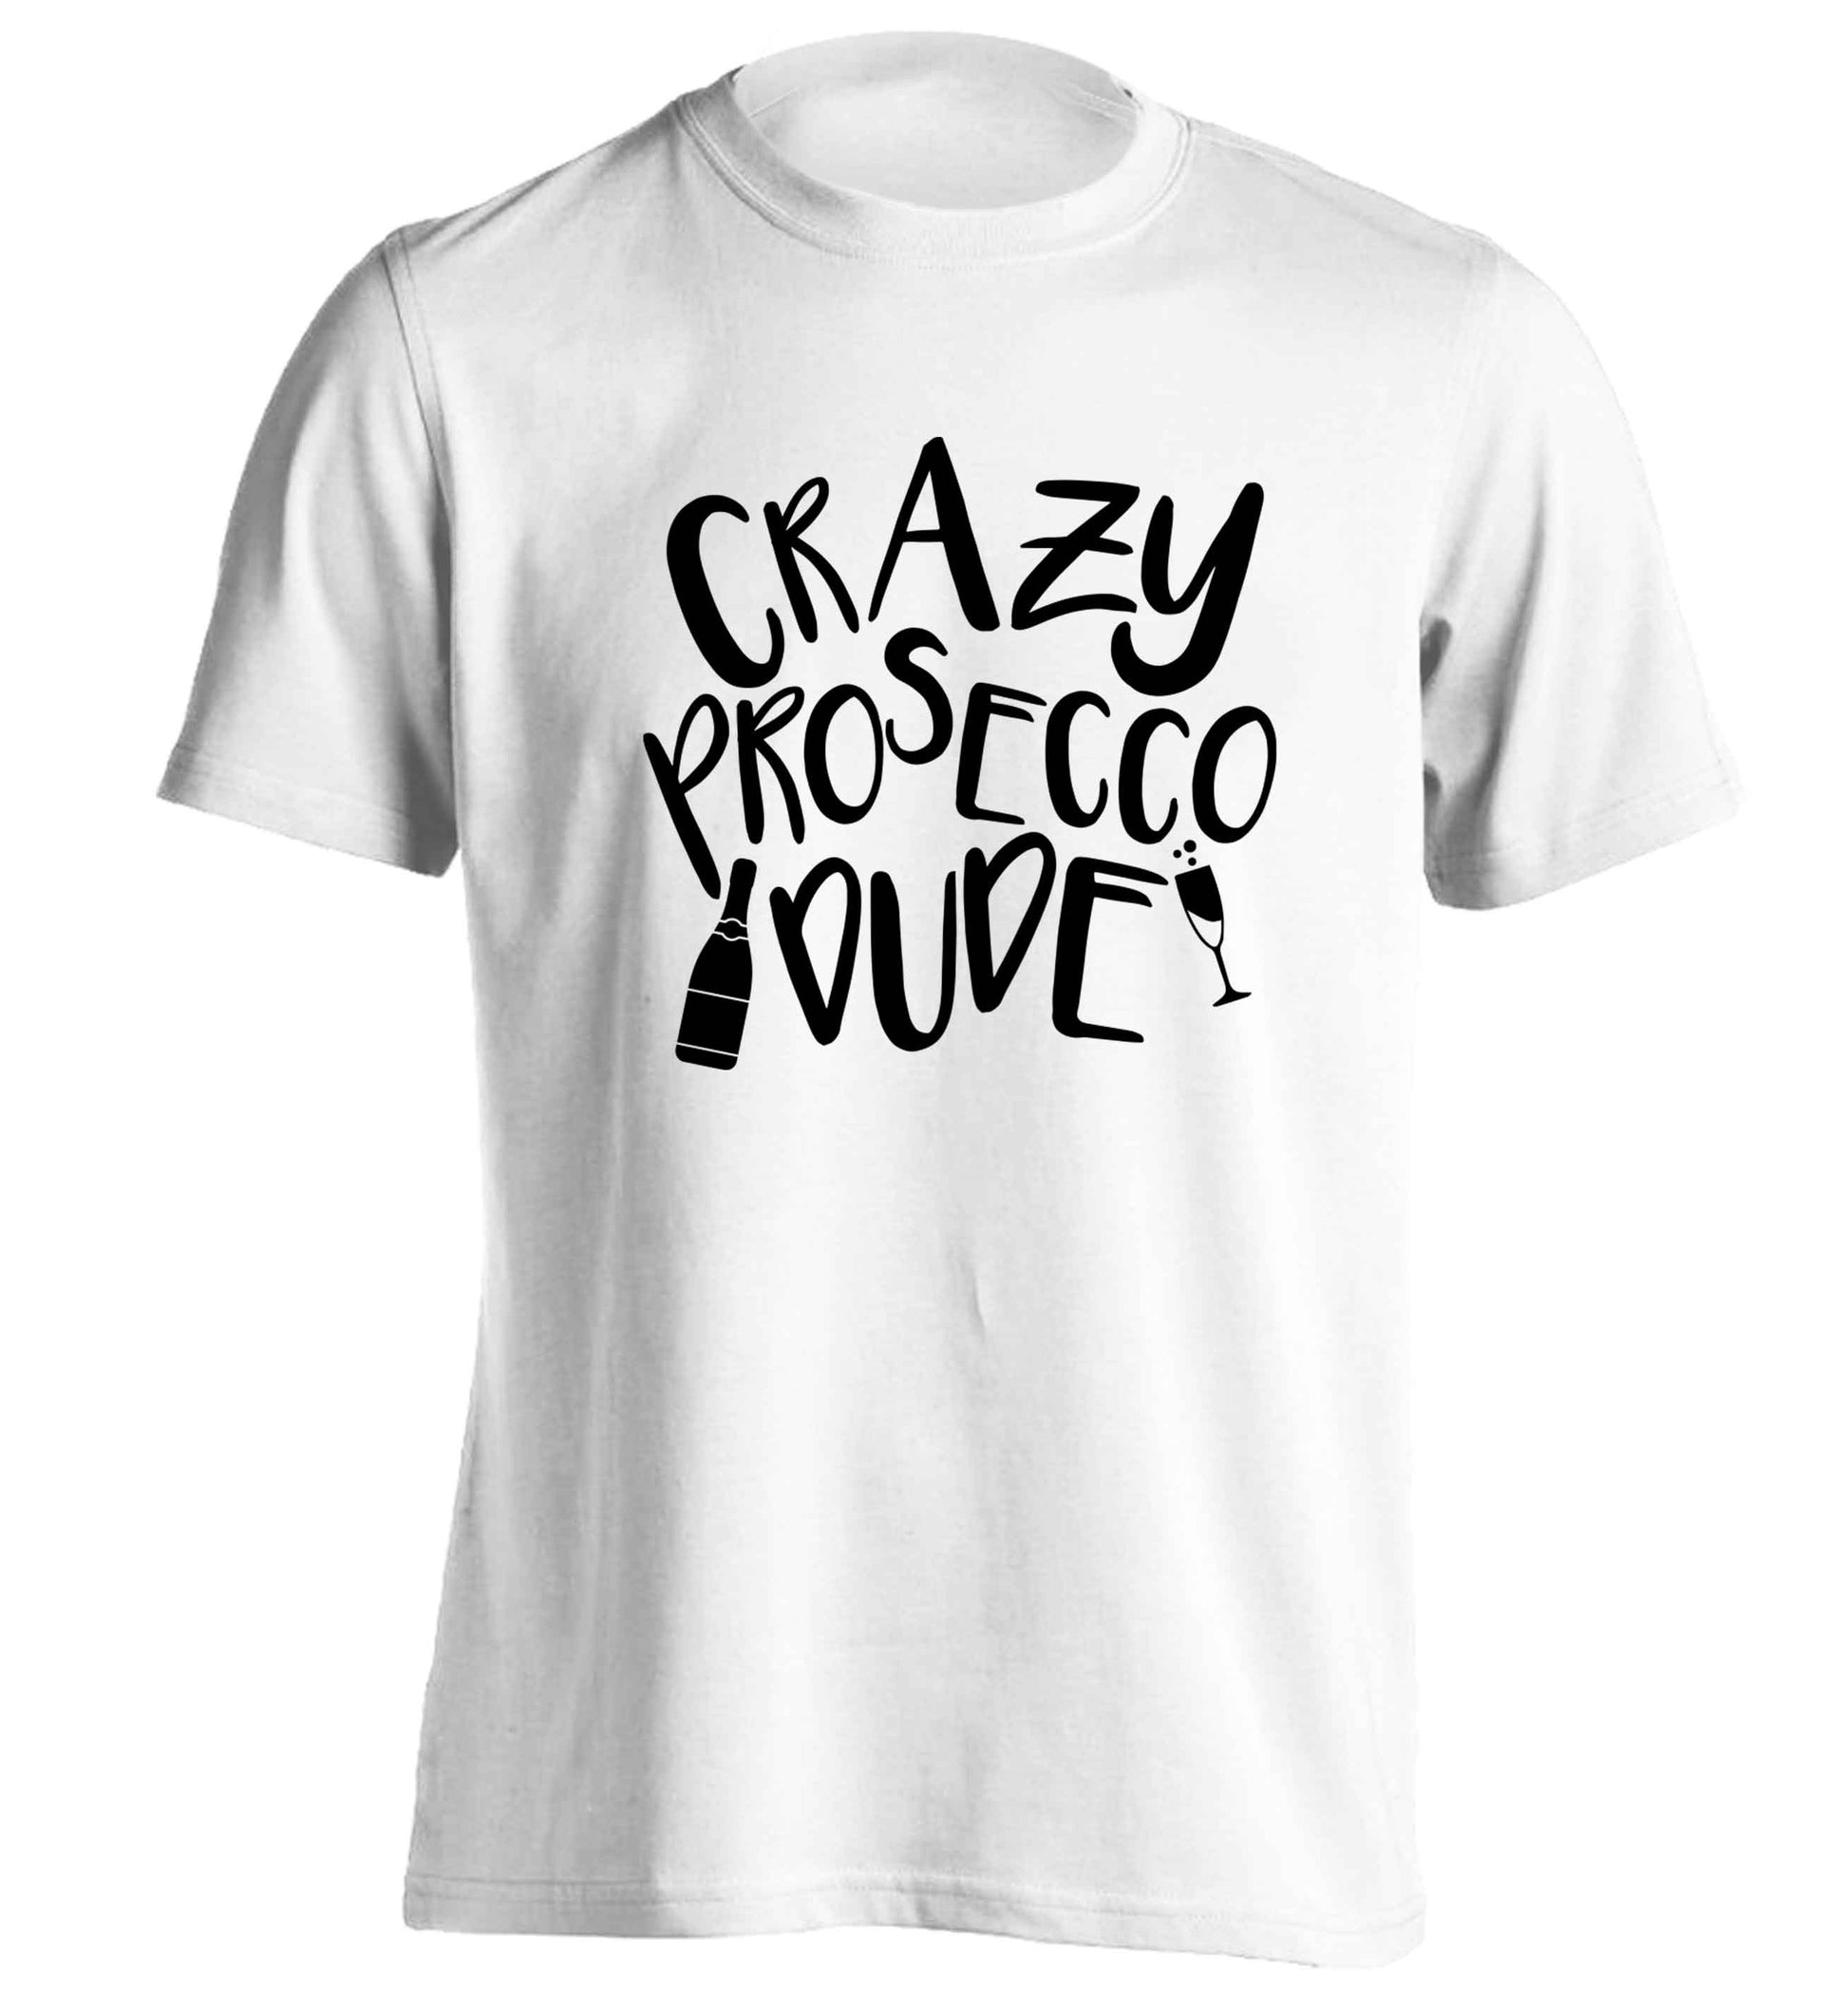 Crazy prosecco dude adults unisex white Tshirt 2XL